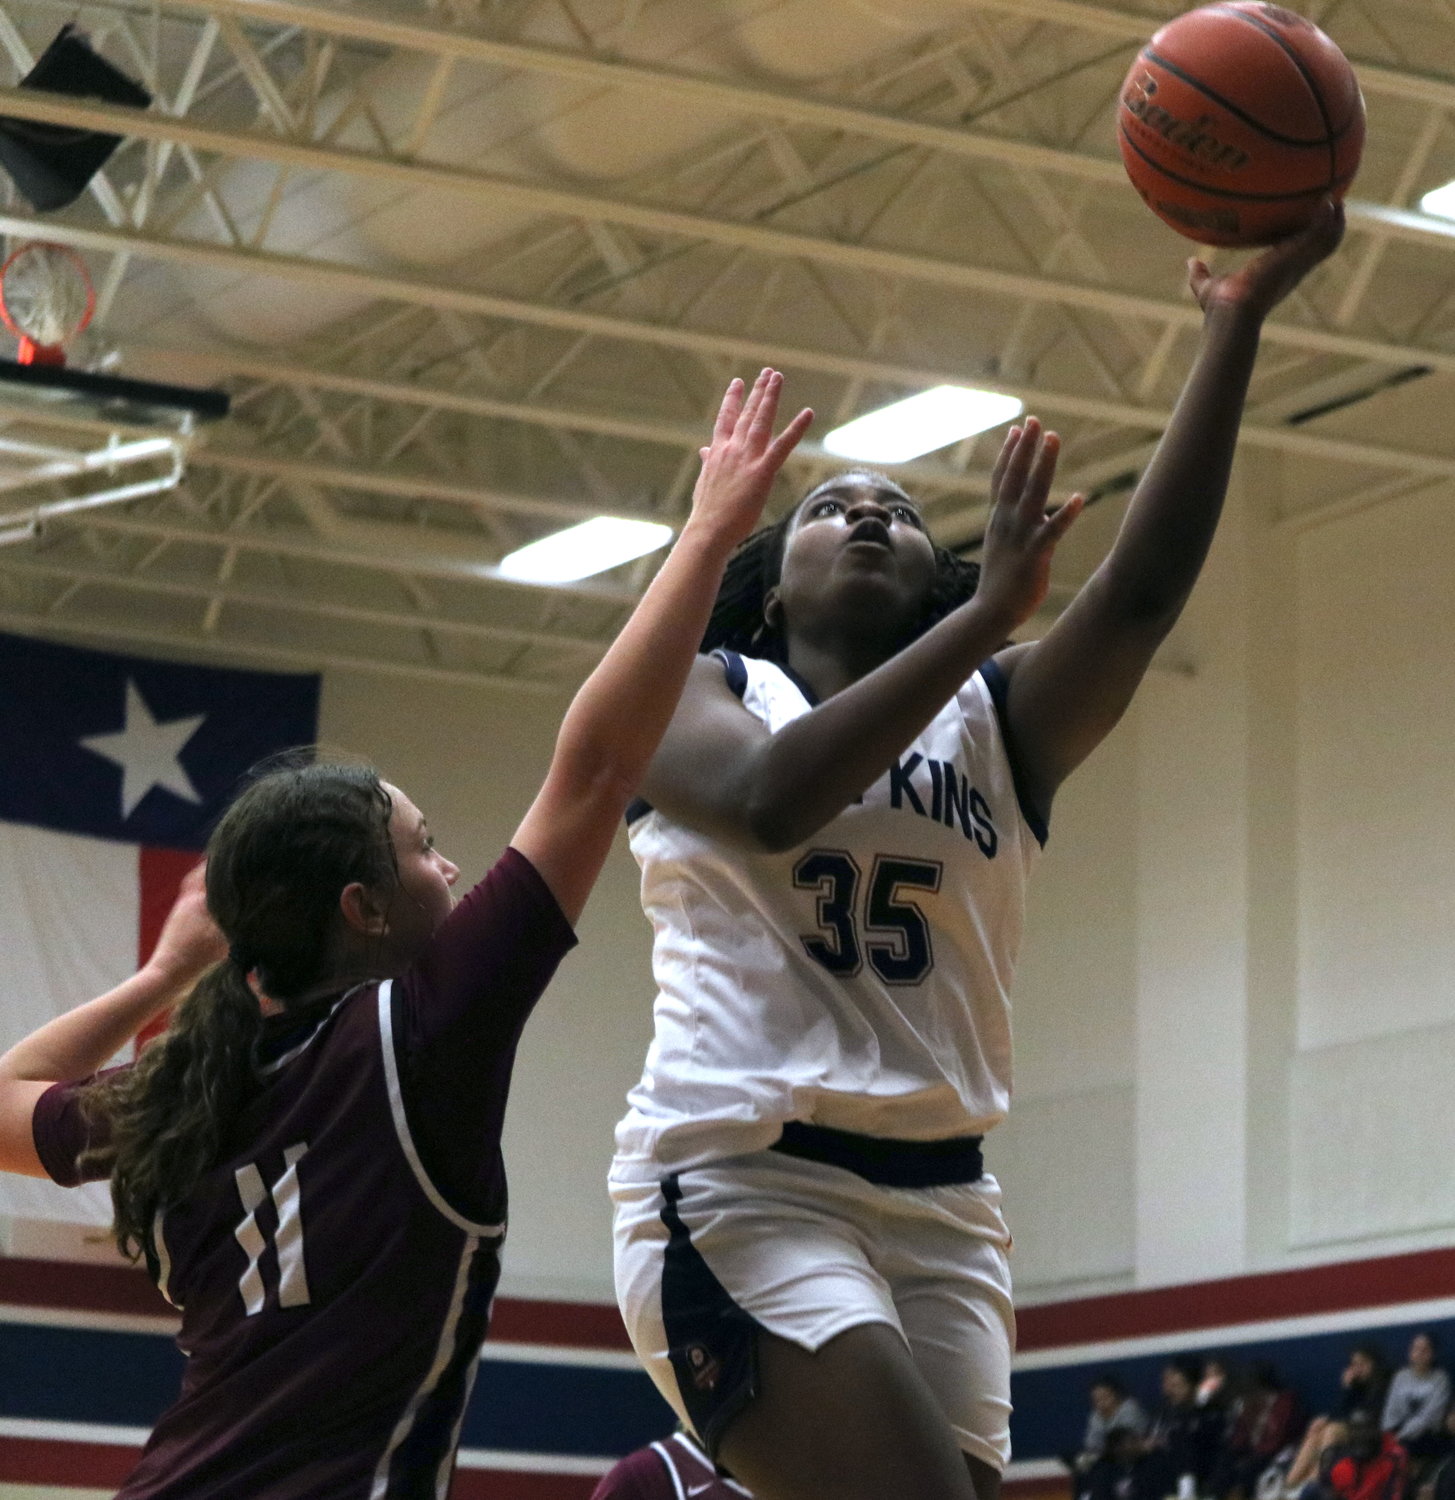 Fiyin Adeleye shoots a layup during Friday’s game between Tompkins and Cinco Ranch at the Tompkins gym.